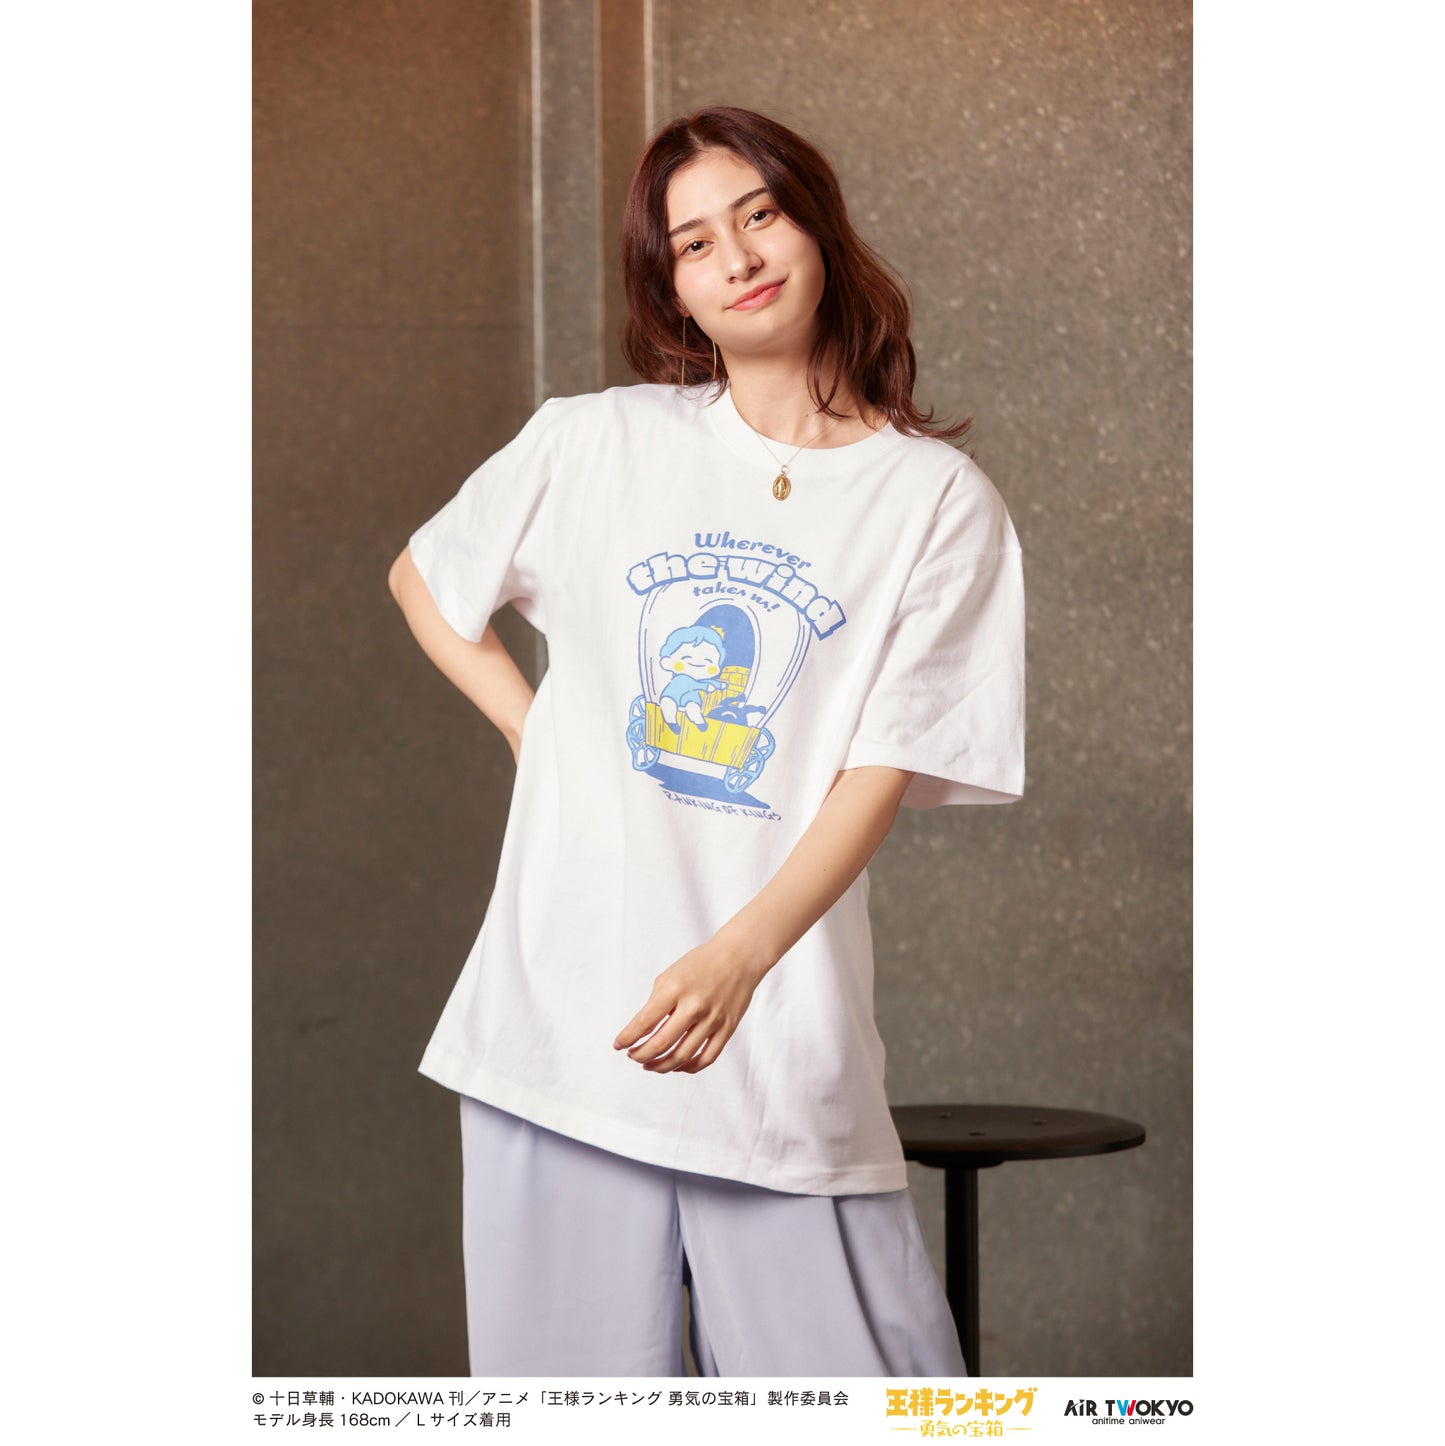 “Ranking of Kings: The Treasure Chest of Courage” scene illustration T-shirt 6